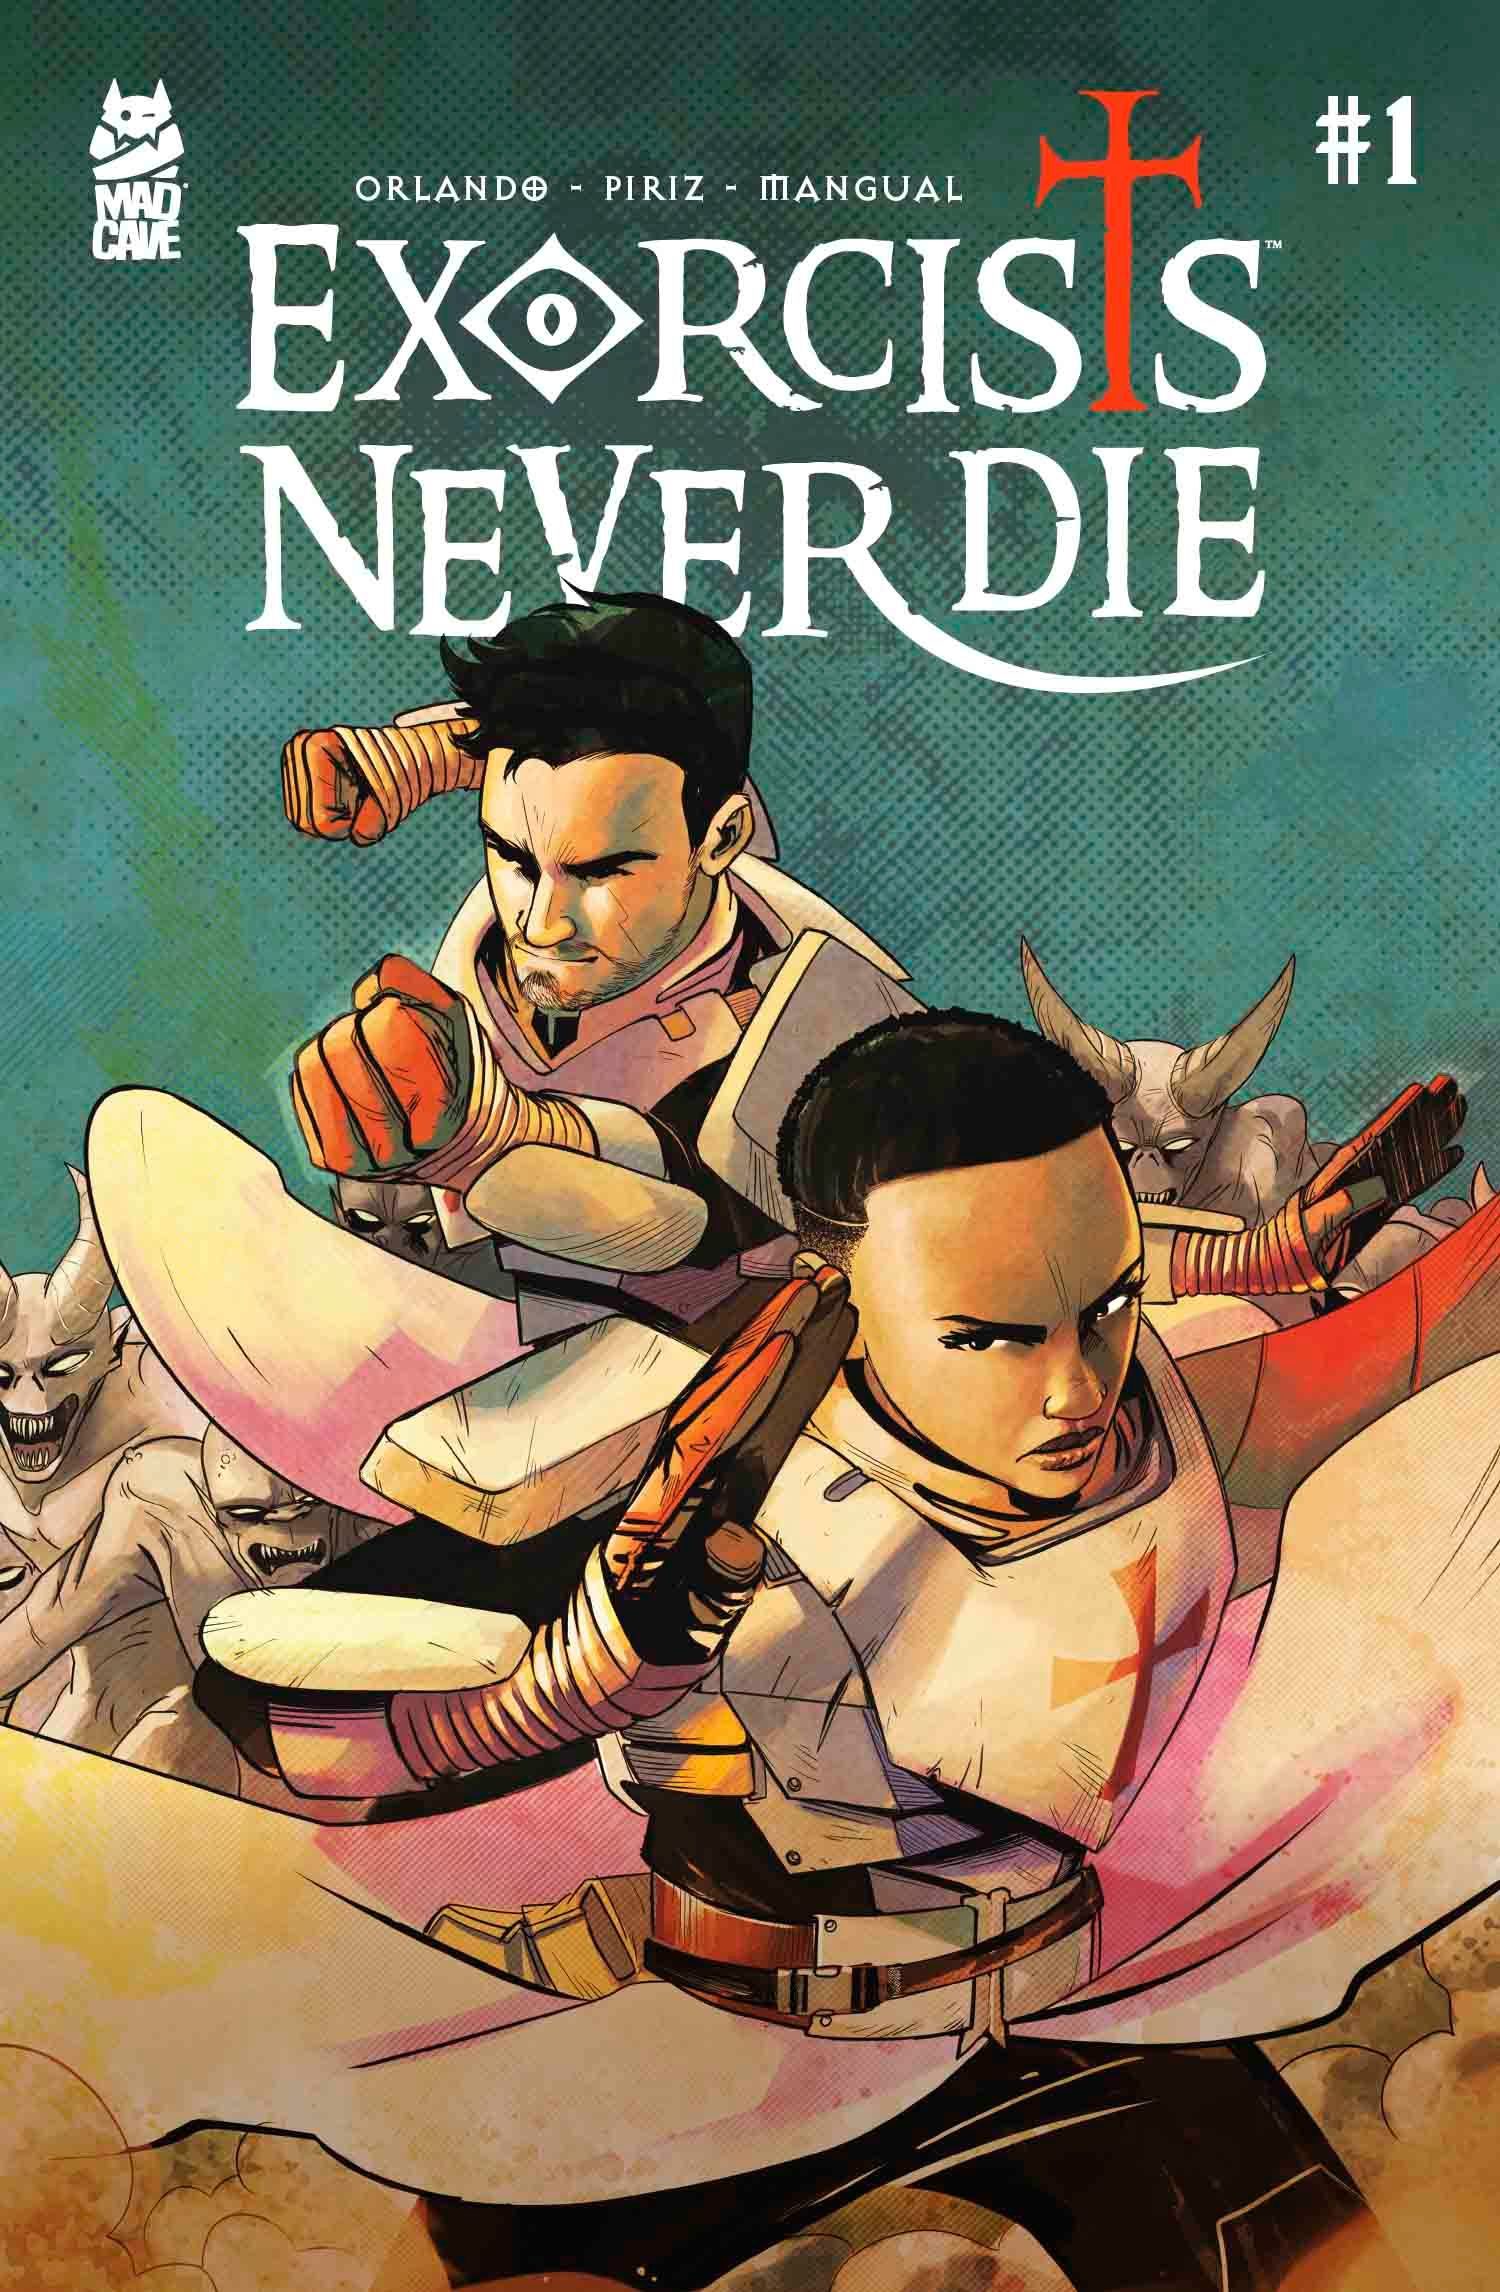 Exorcists Never Die #1 Comic